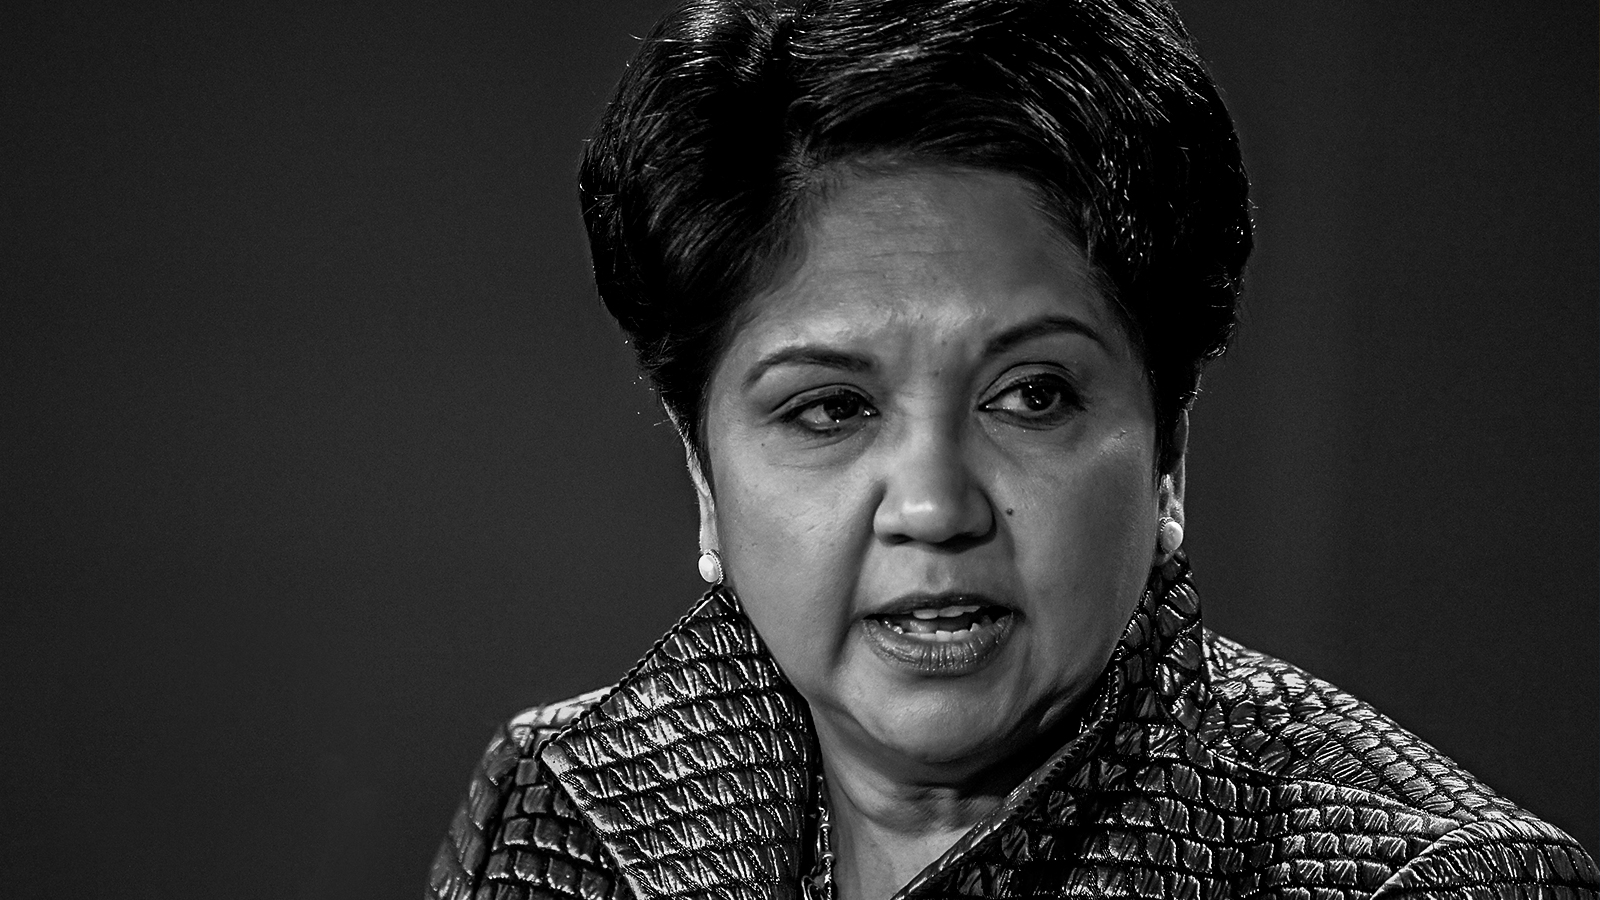 Career advice lessons from departing PepsiCo CEO Indra Nooyi